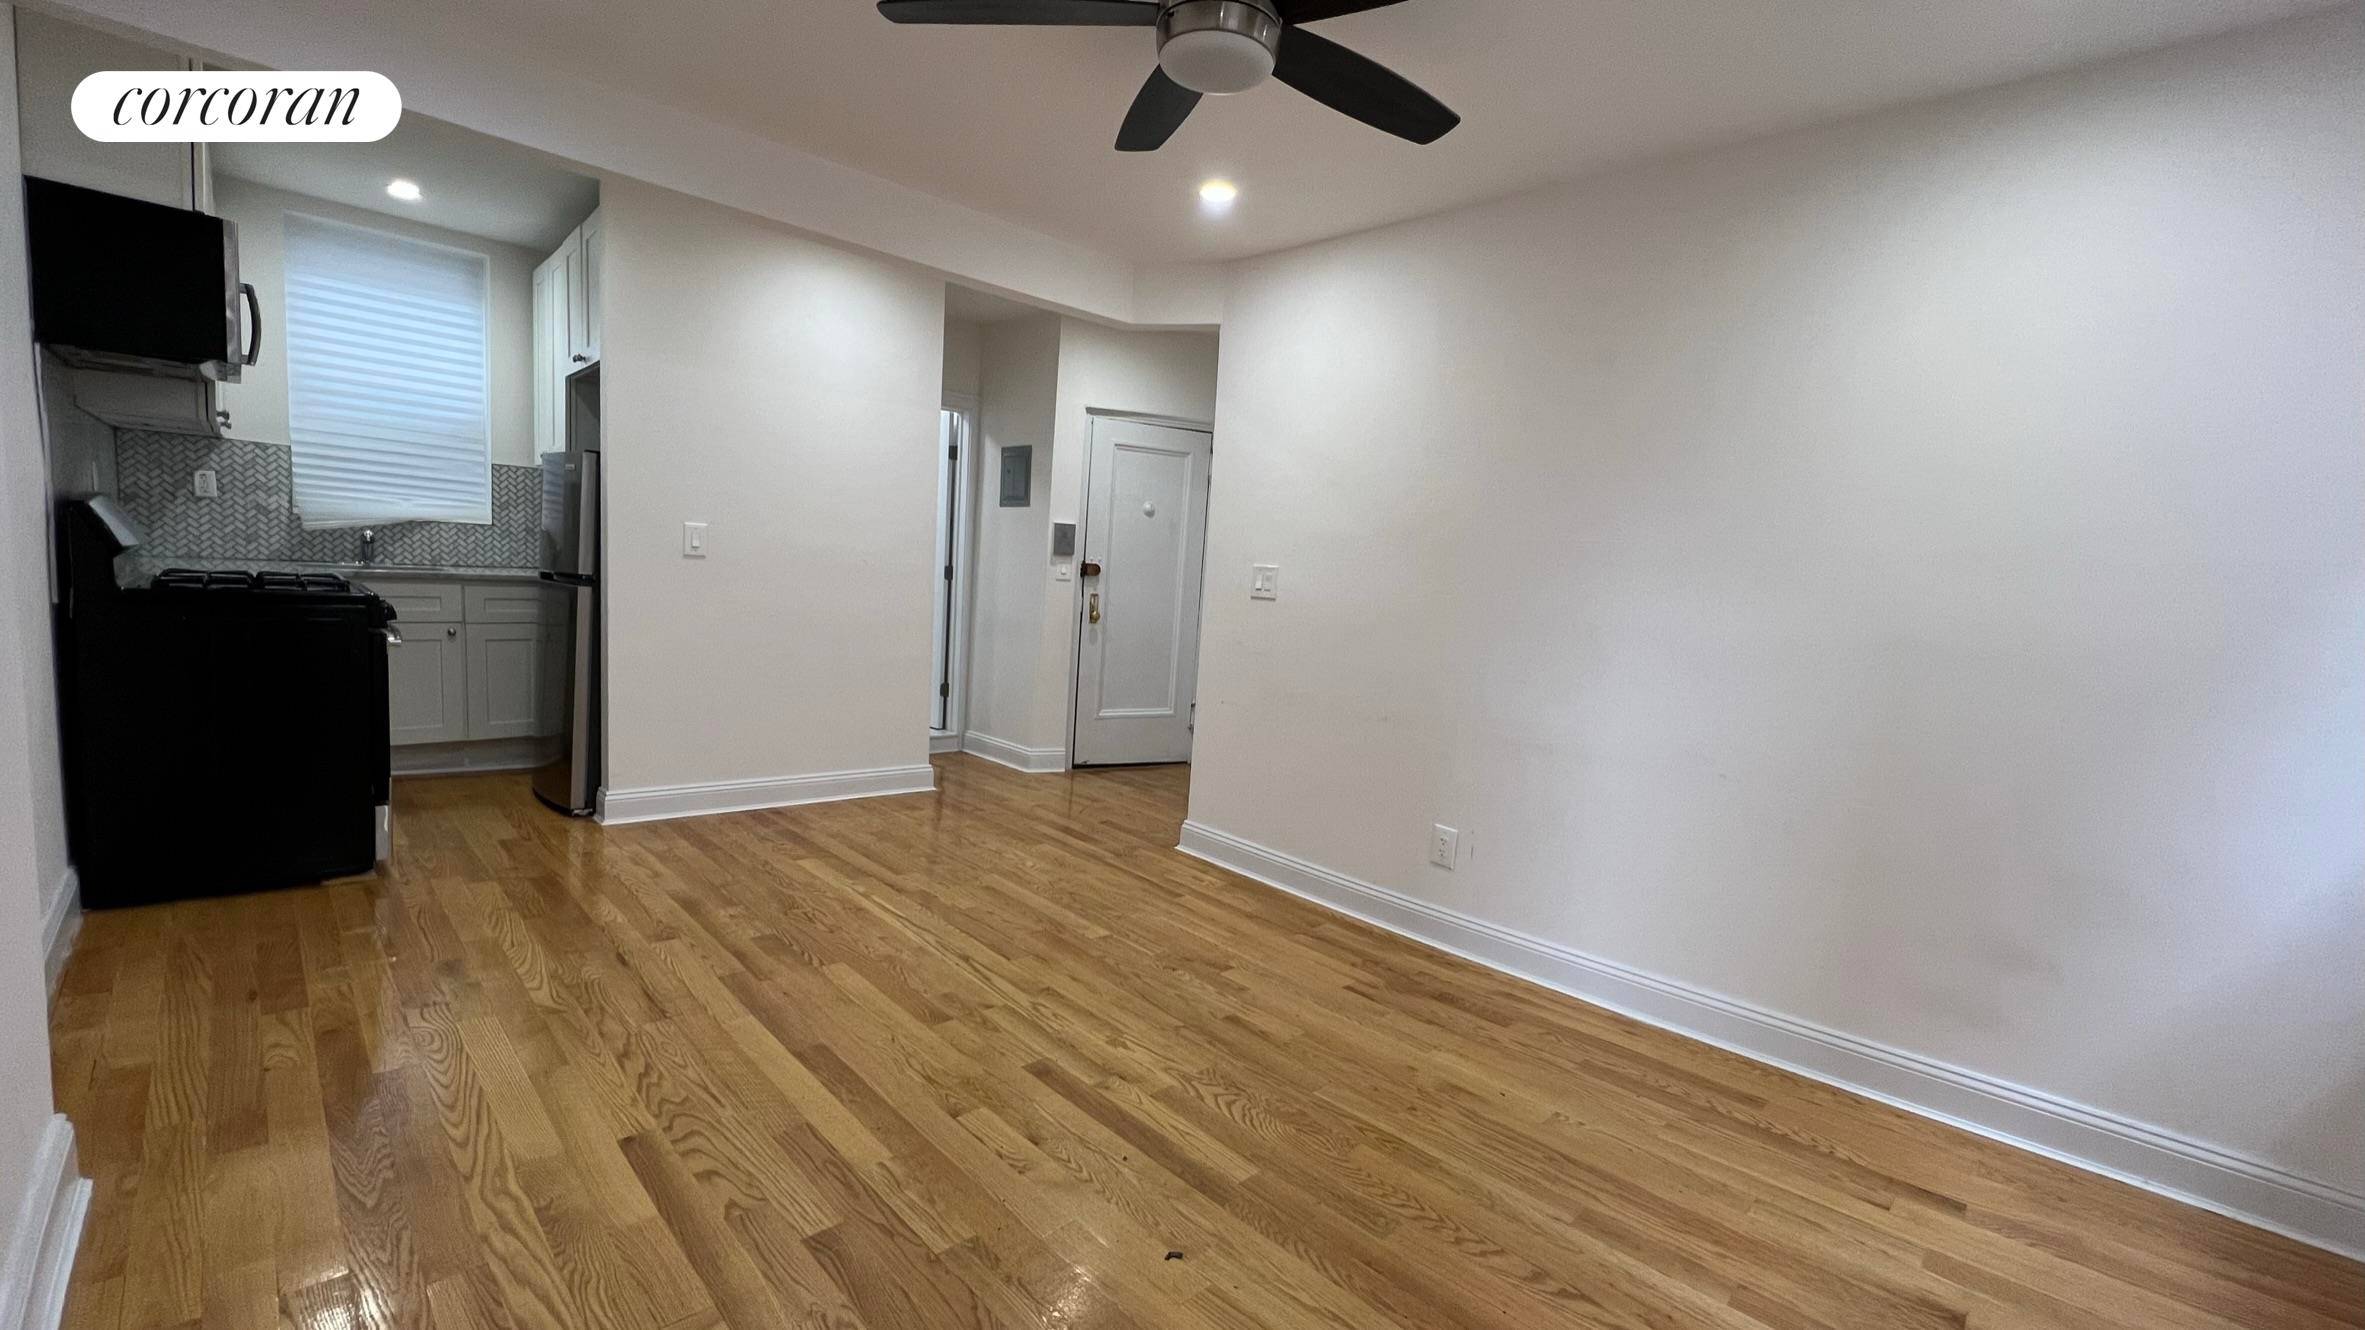 Beautifully gut renovated just a few years ago, this one bedroom apartment in the heart of Cobble Hill features Washer Dryer in unit New modern white kitchen with marble countertops, ...